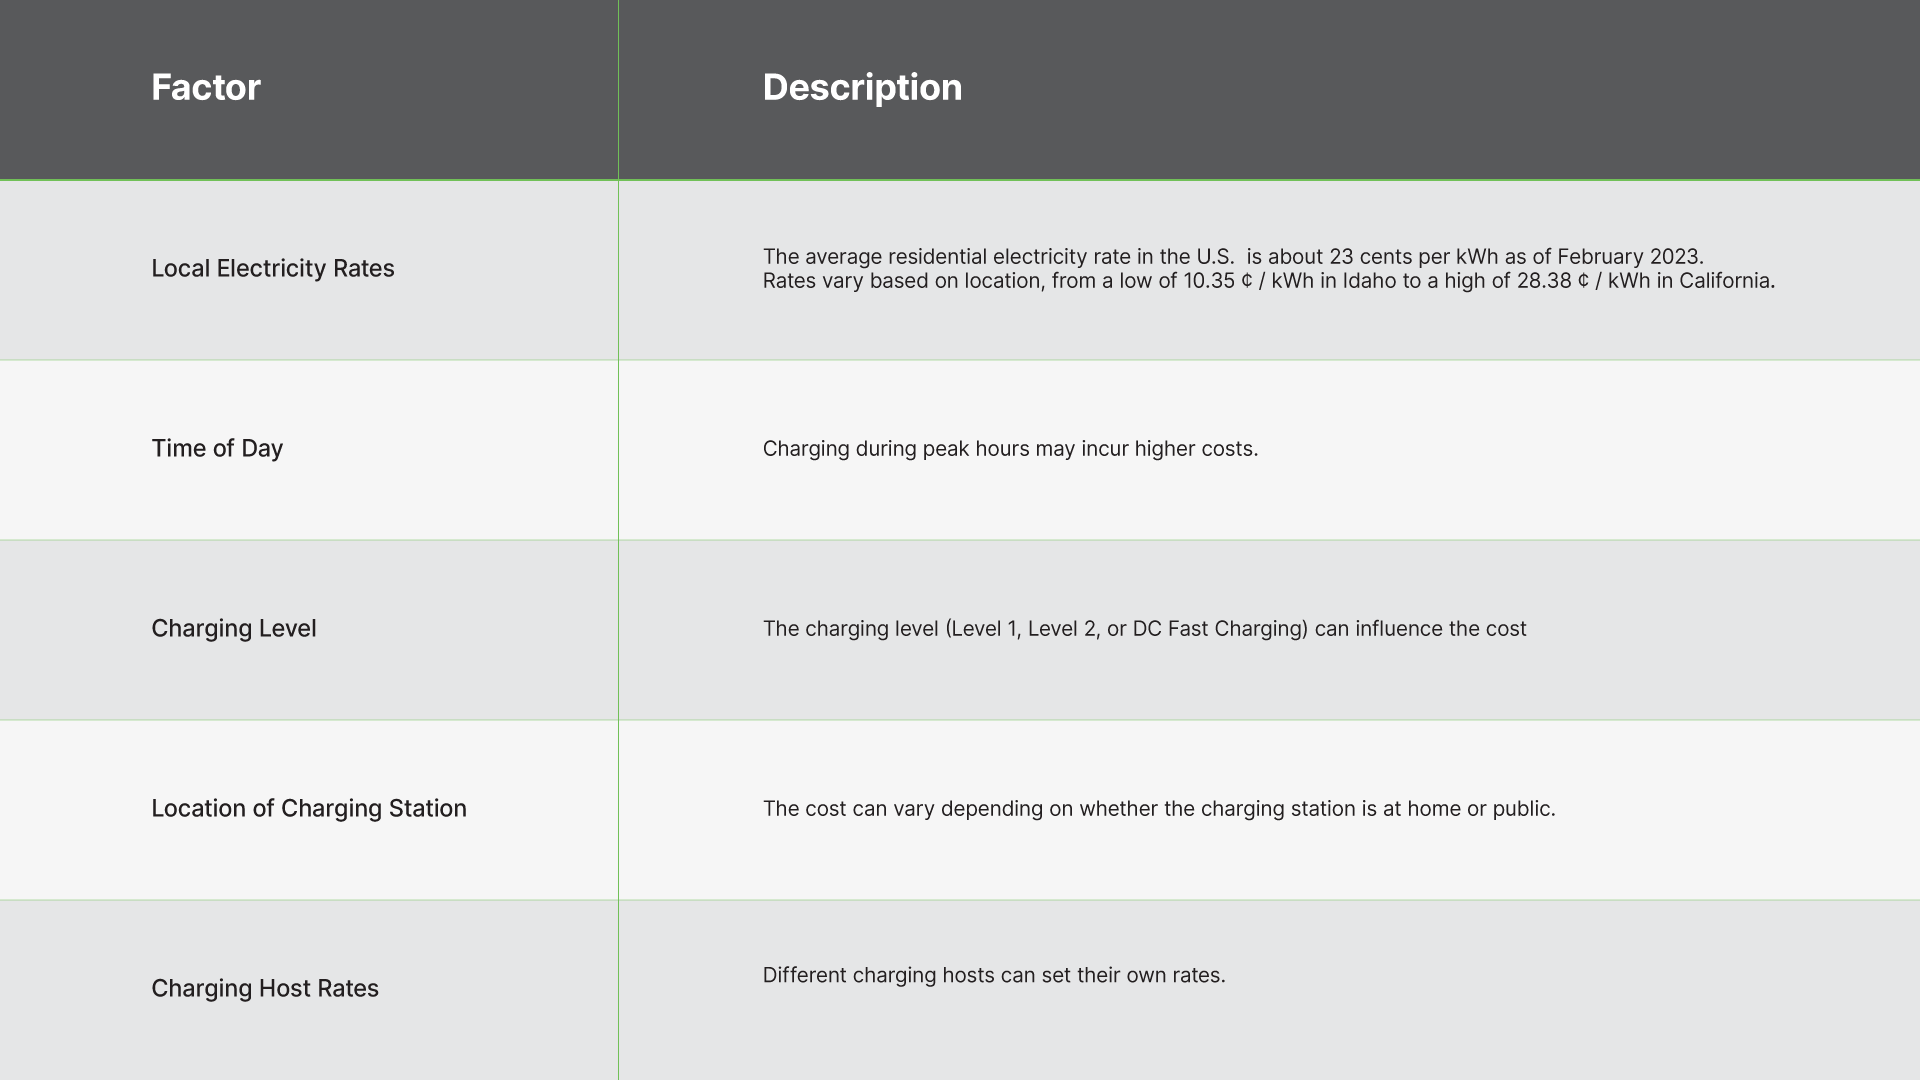 A table showing the various factors that influence the cost of charging an electric vehicle, including local electricity rates, time of day, charging level, and location of the charging station.